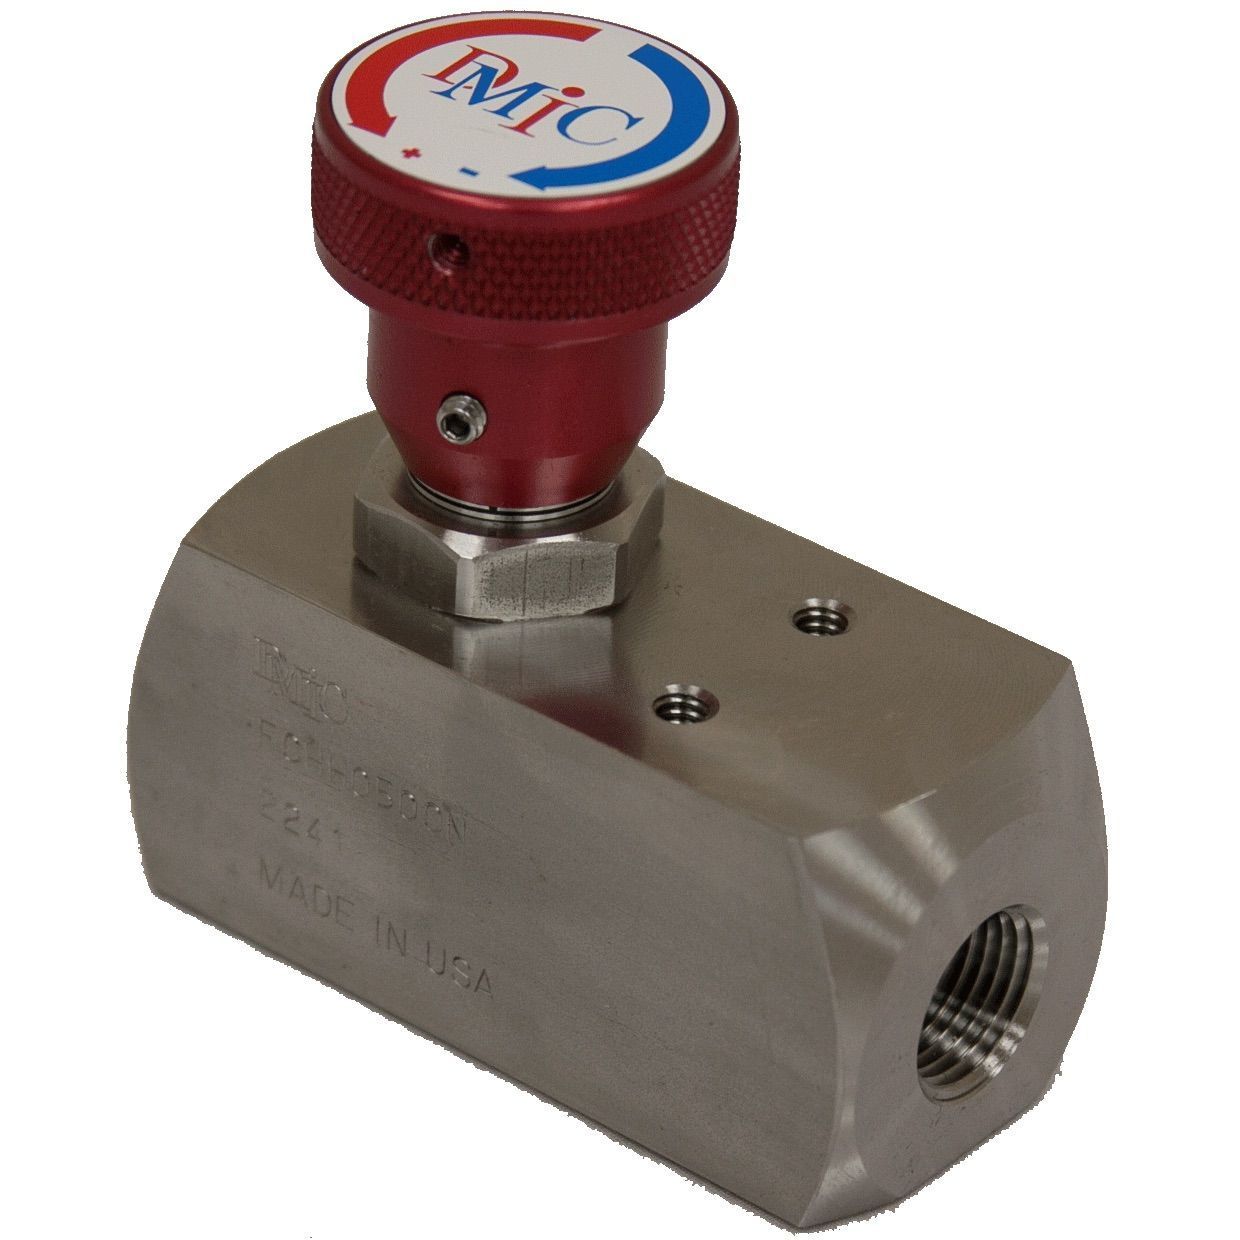 FCHH-1250N-1141 : DMIC Flow Control, Unidirectional, with Integrated Check, 1.25" NPT, Carbon Steel, 10000psi